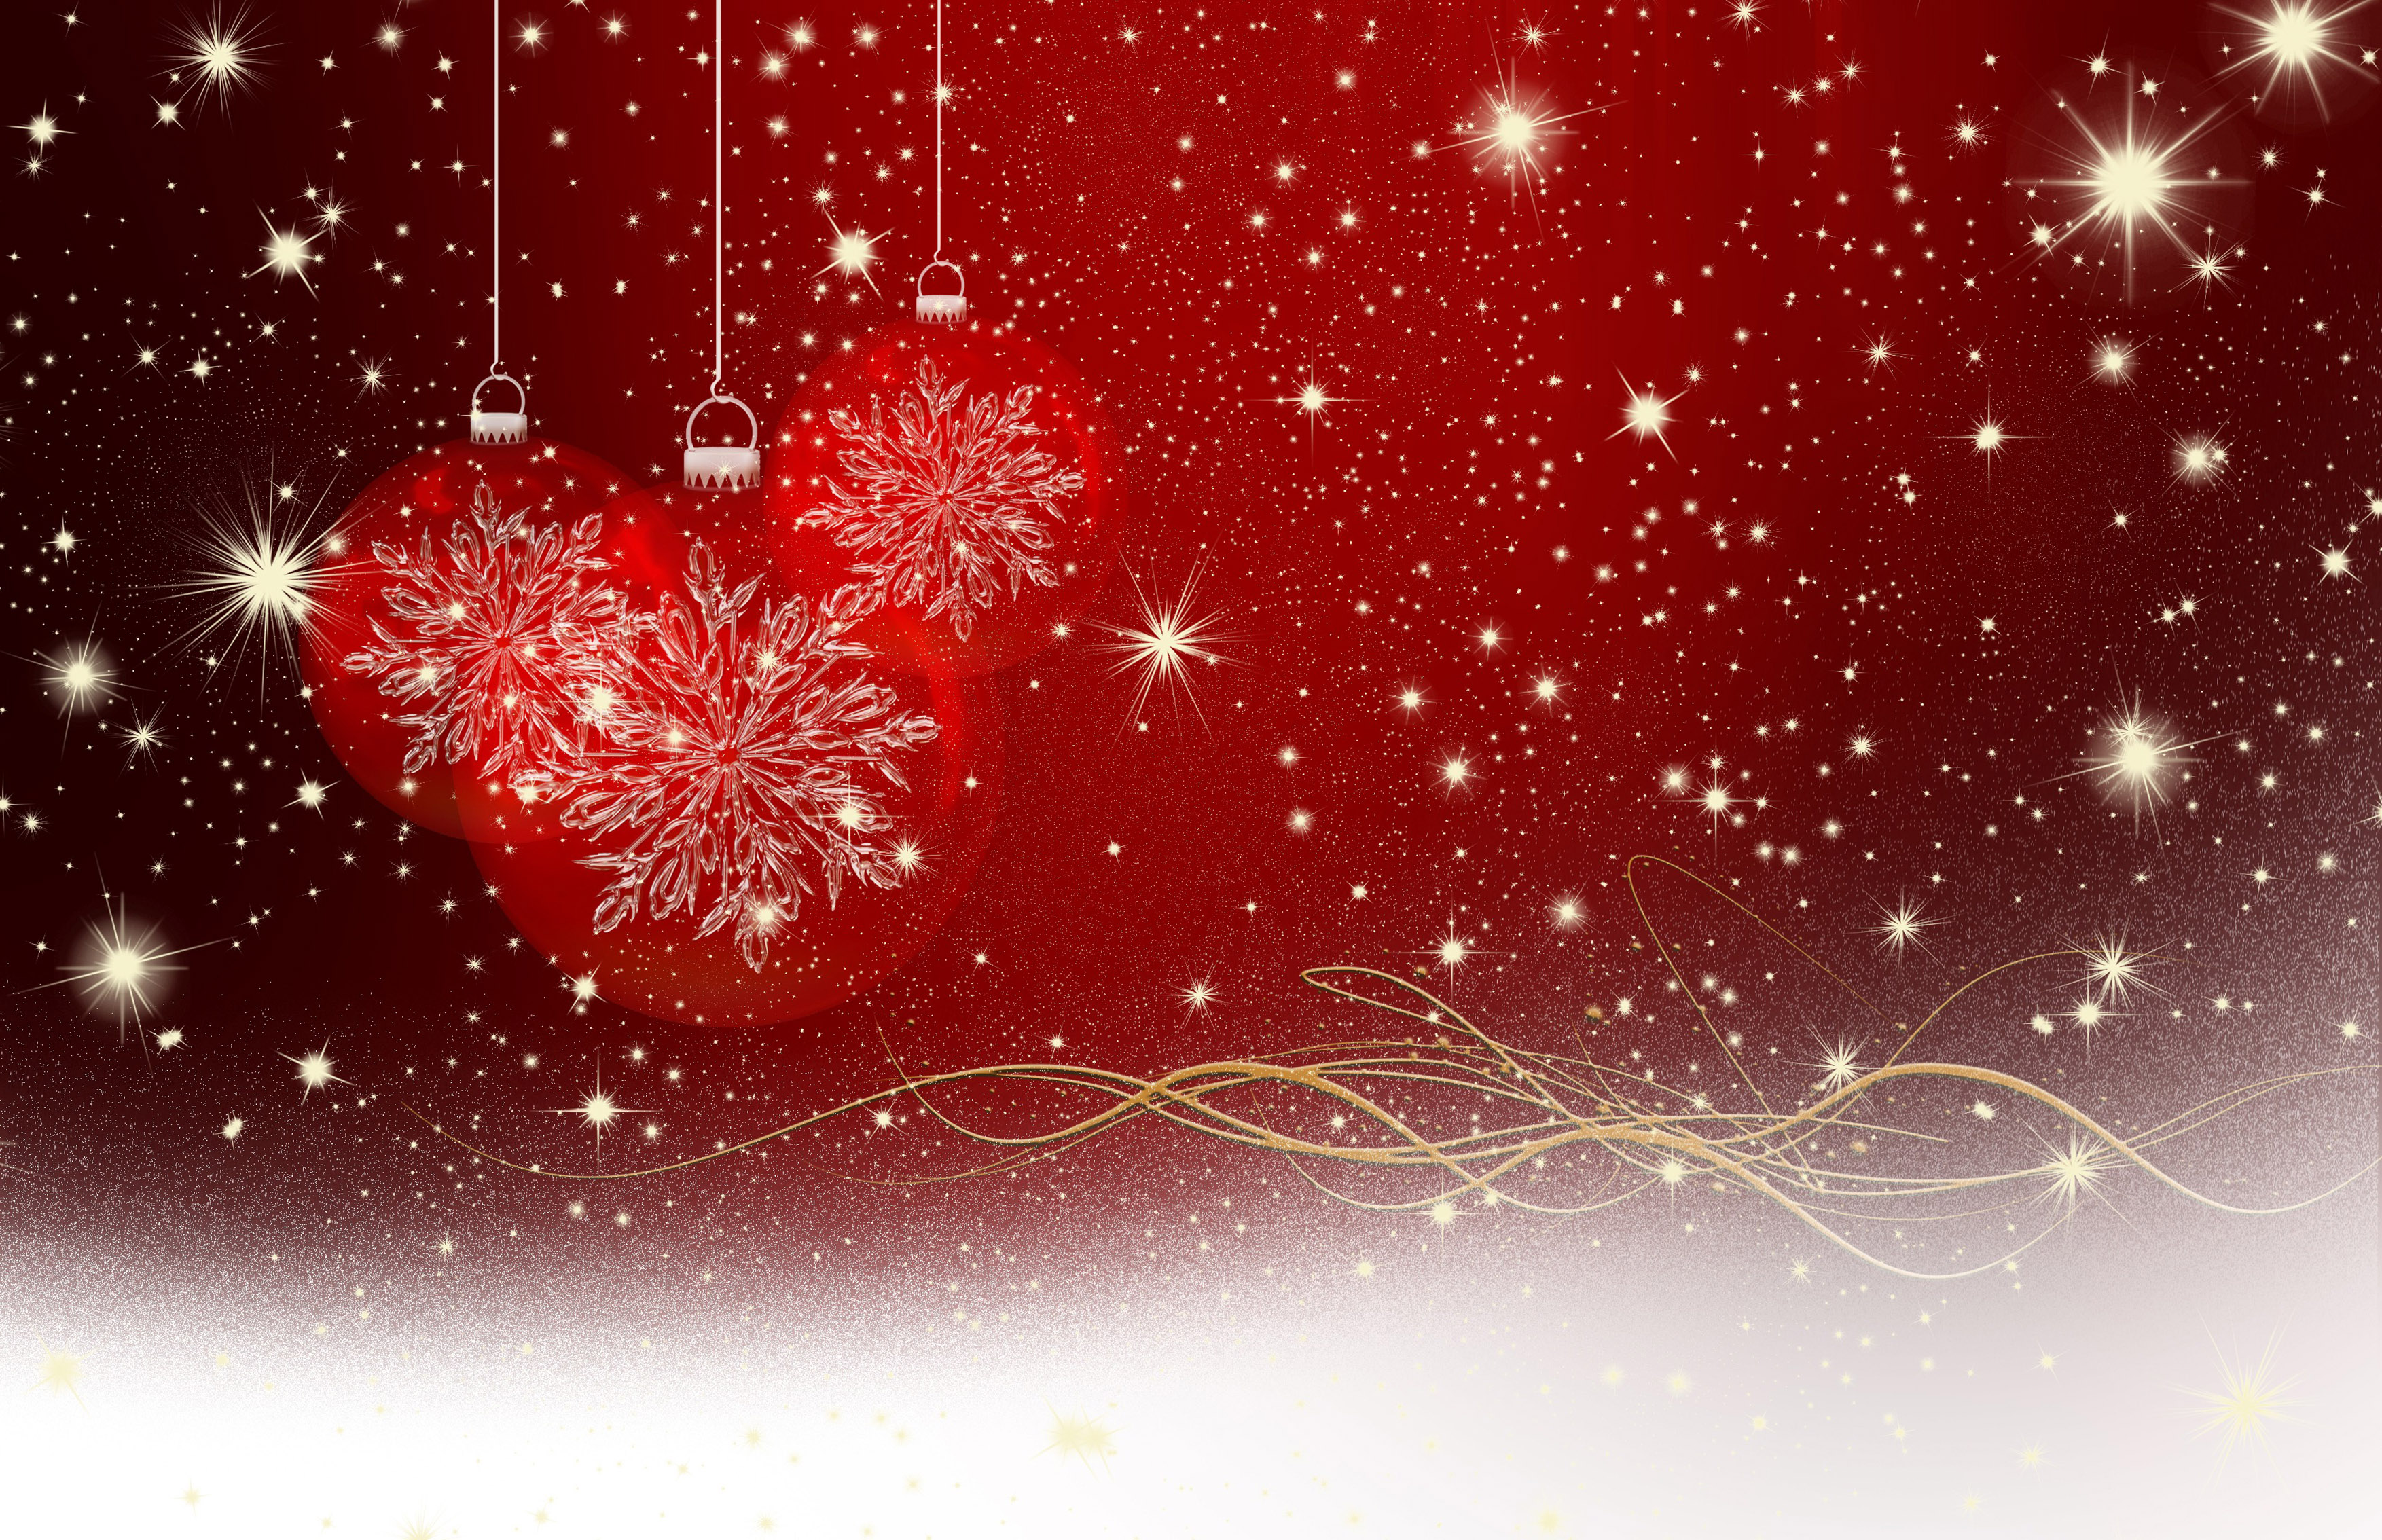 Red Christmas Wallpaper Gallery